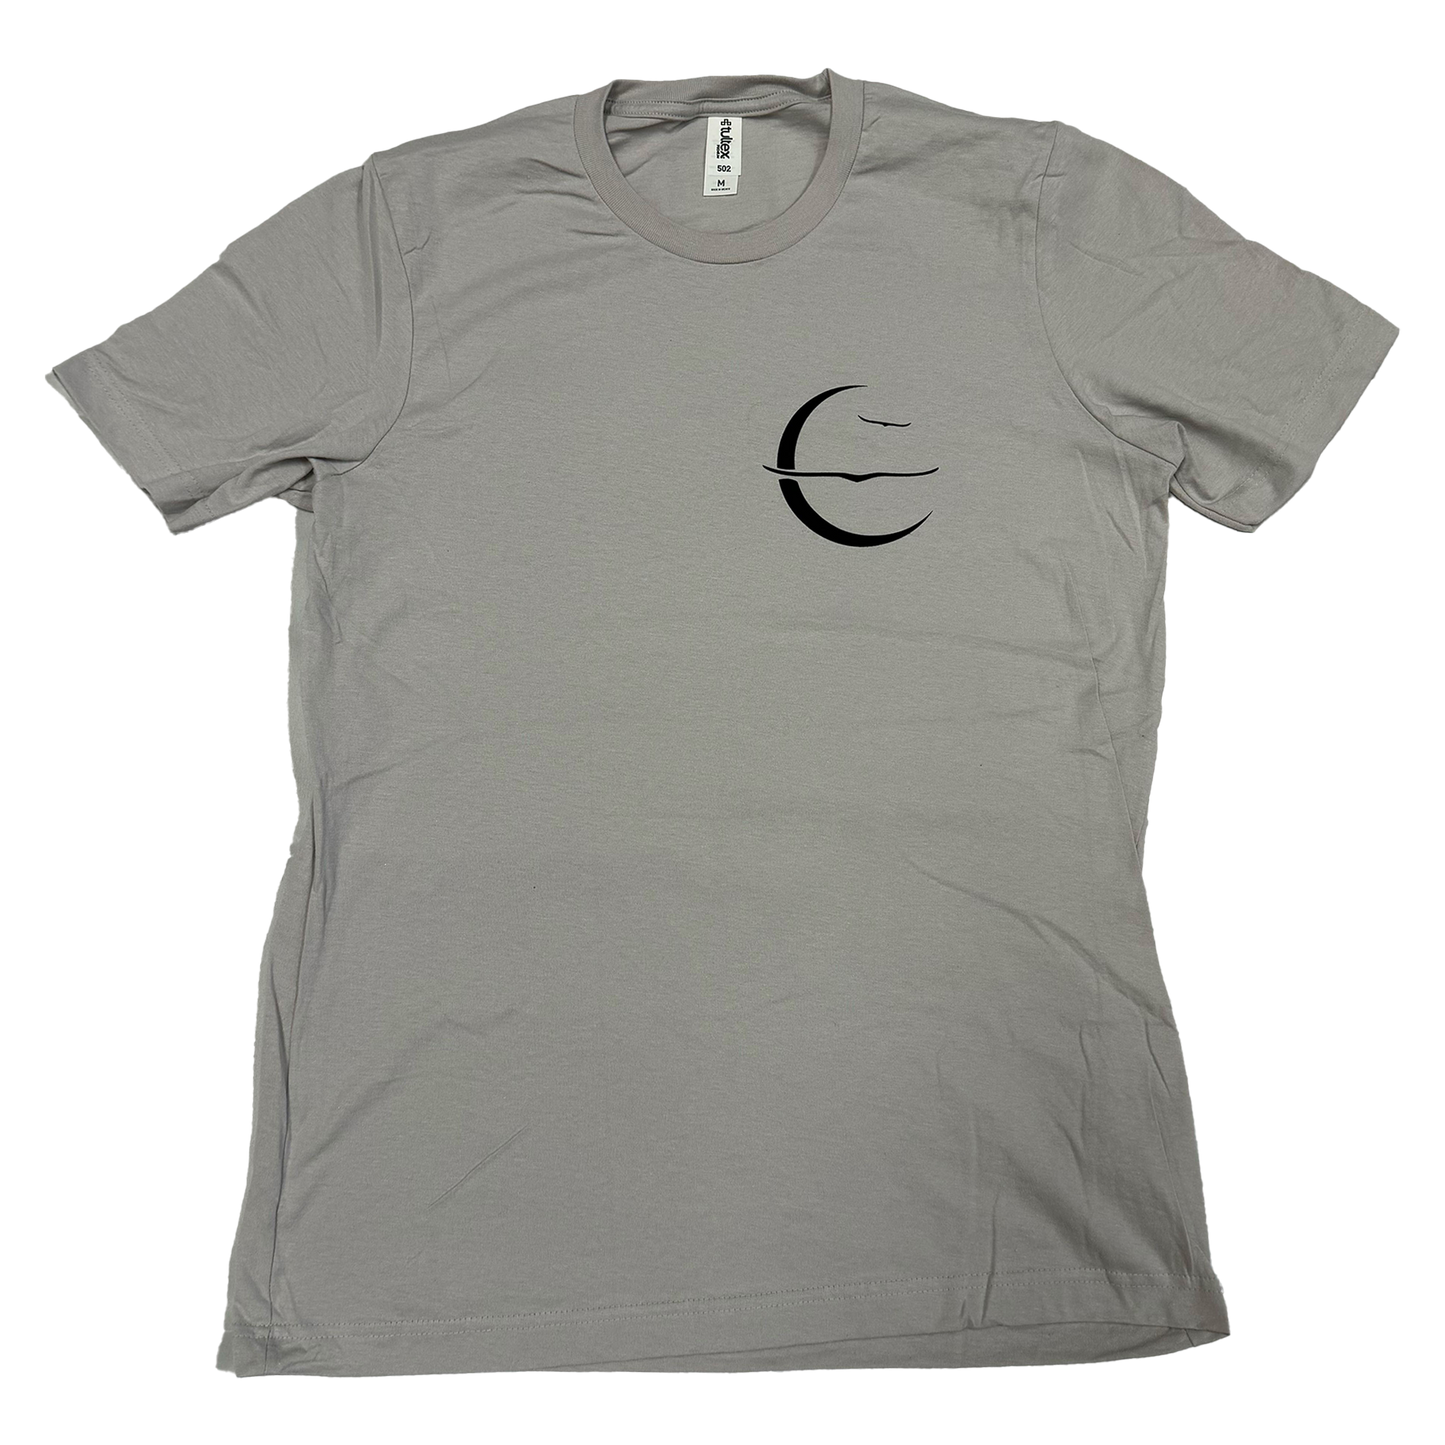 To The Moon Deluxe Tour T-Shirt